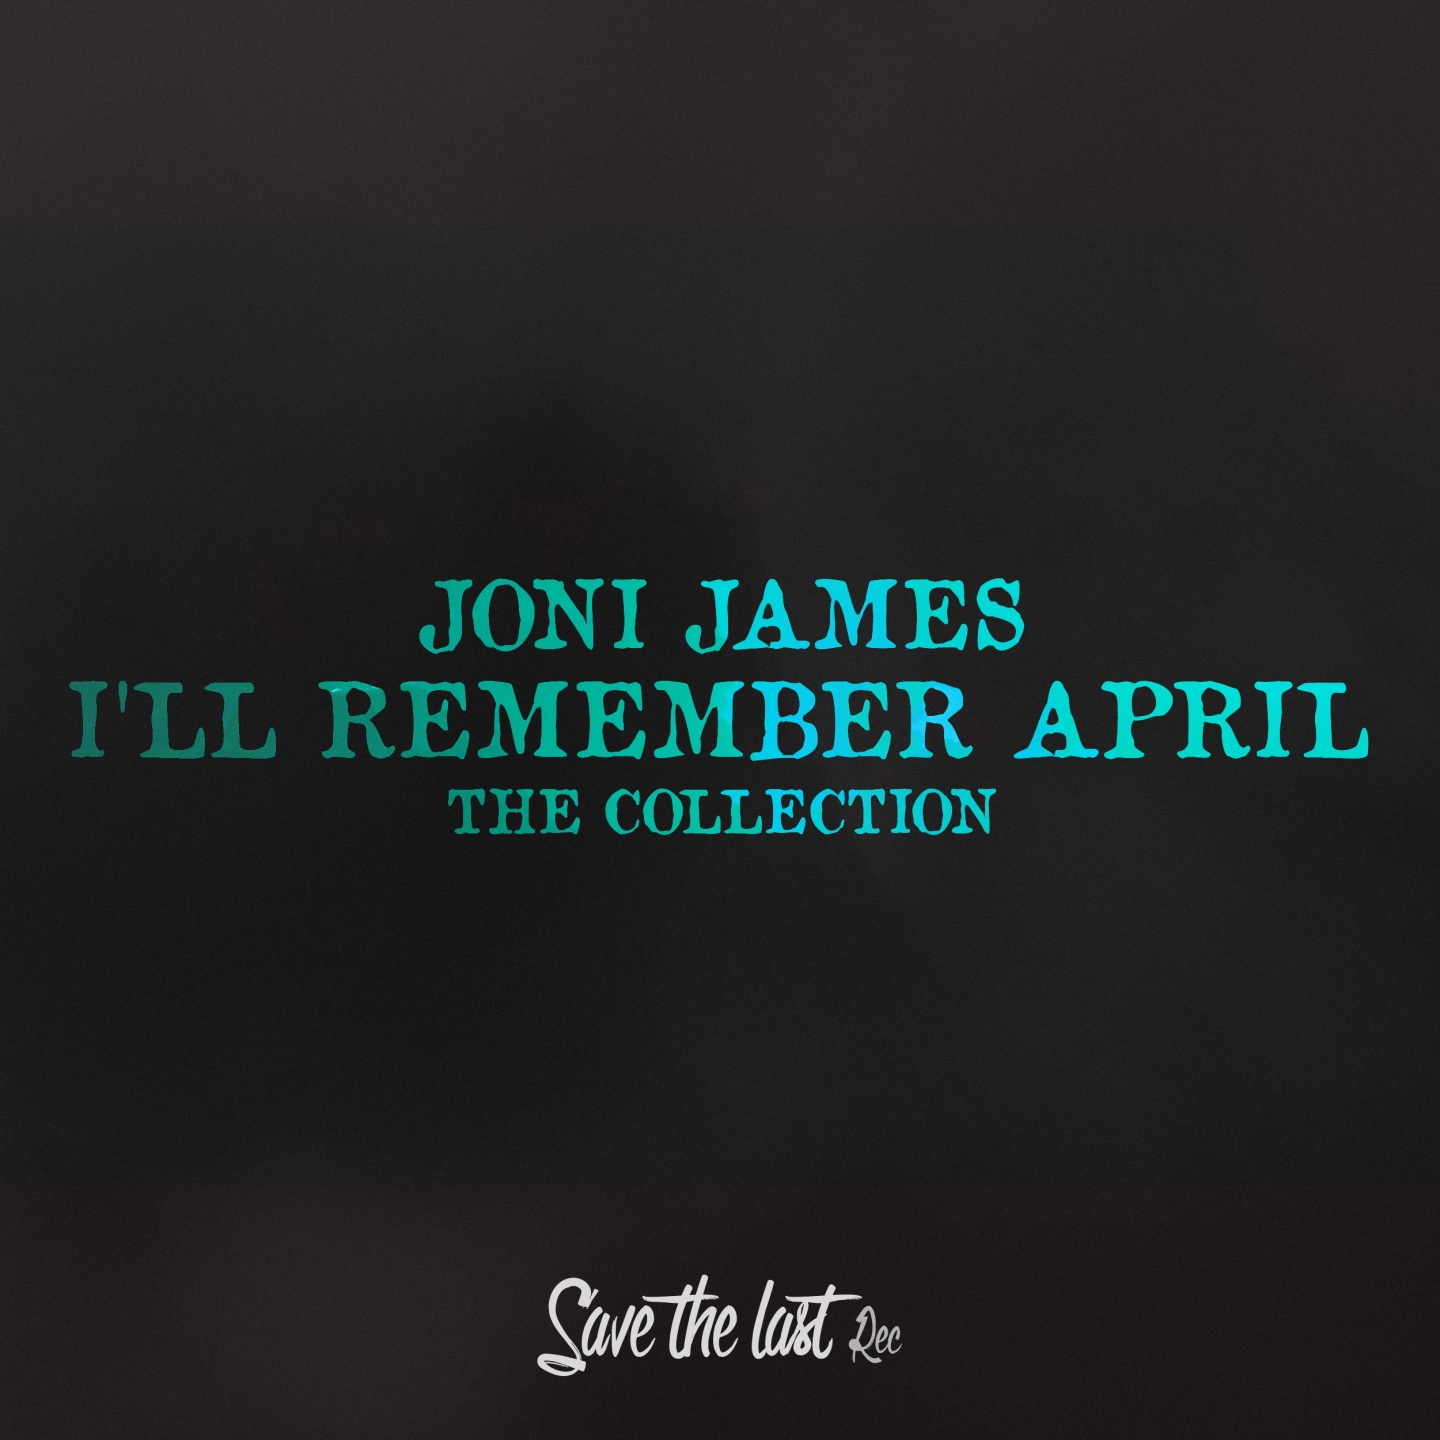 I'll Remember April (The Collection)